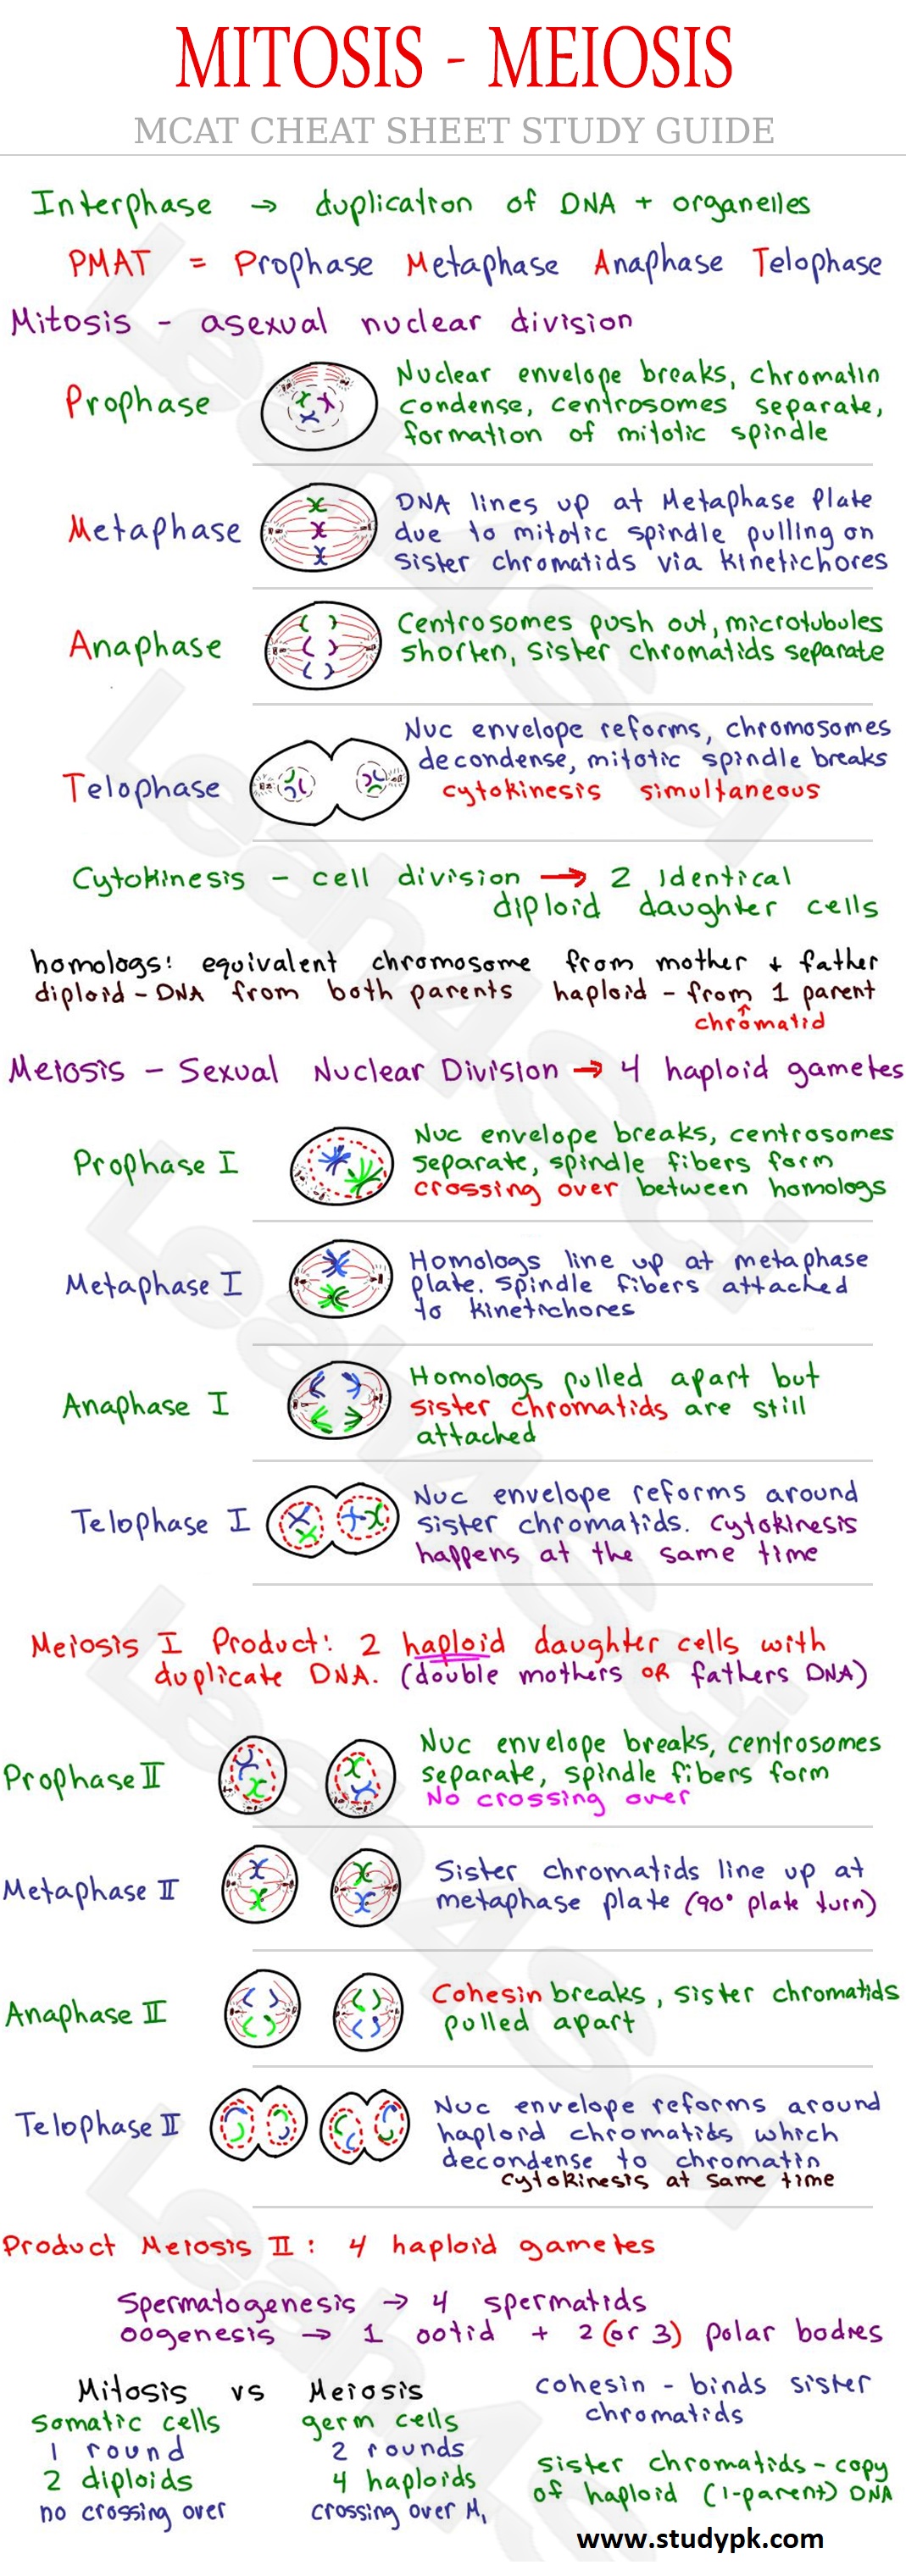 Mitosis and Meiosis MCAT Biology Cheat Sheet Study Guide